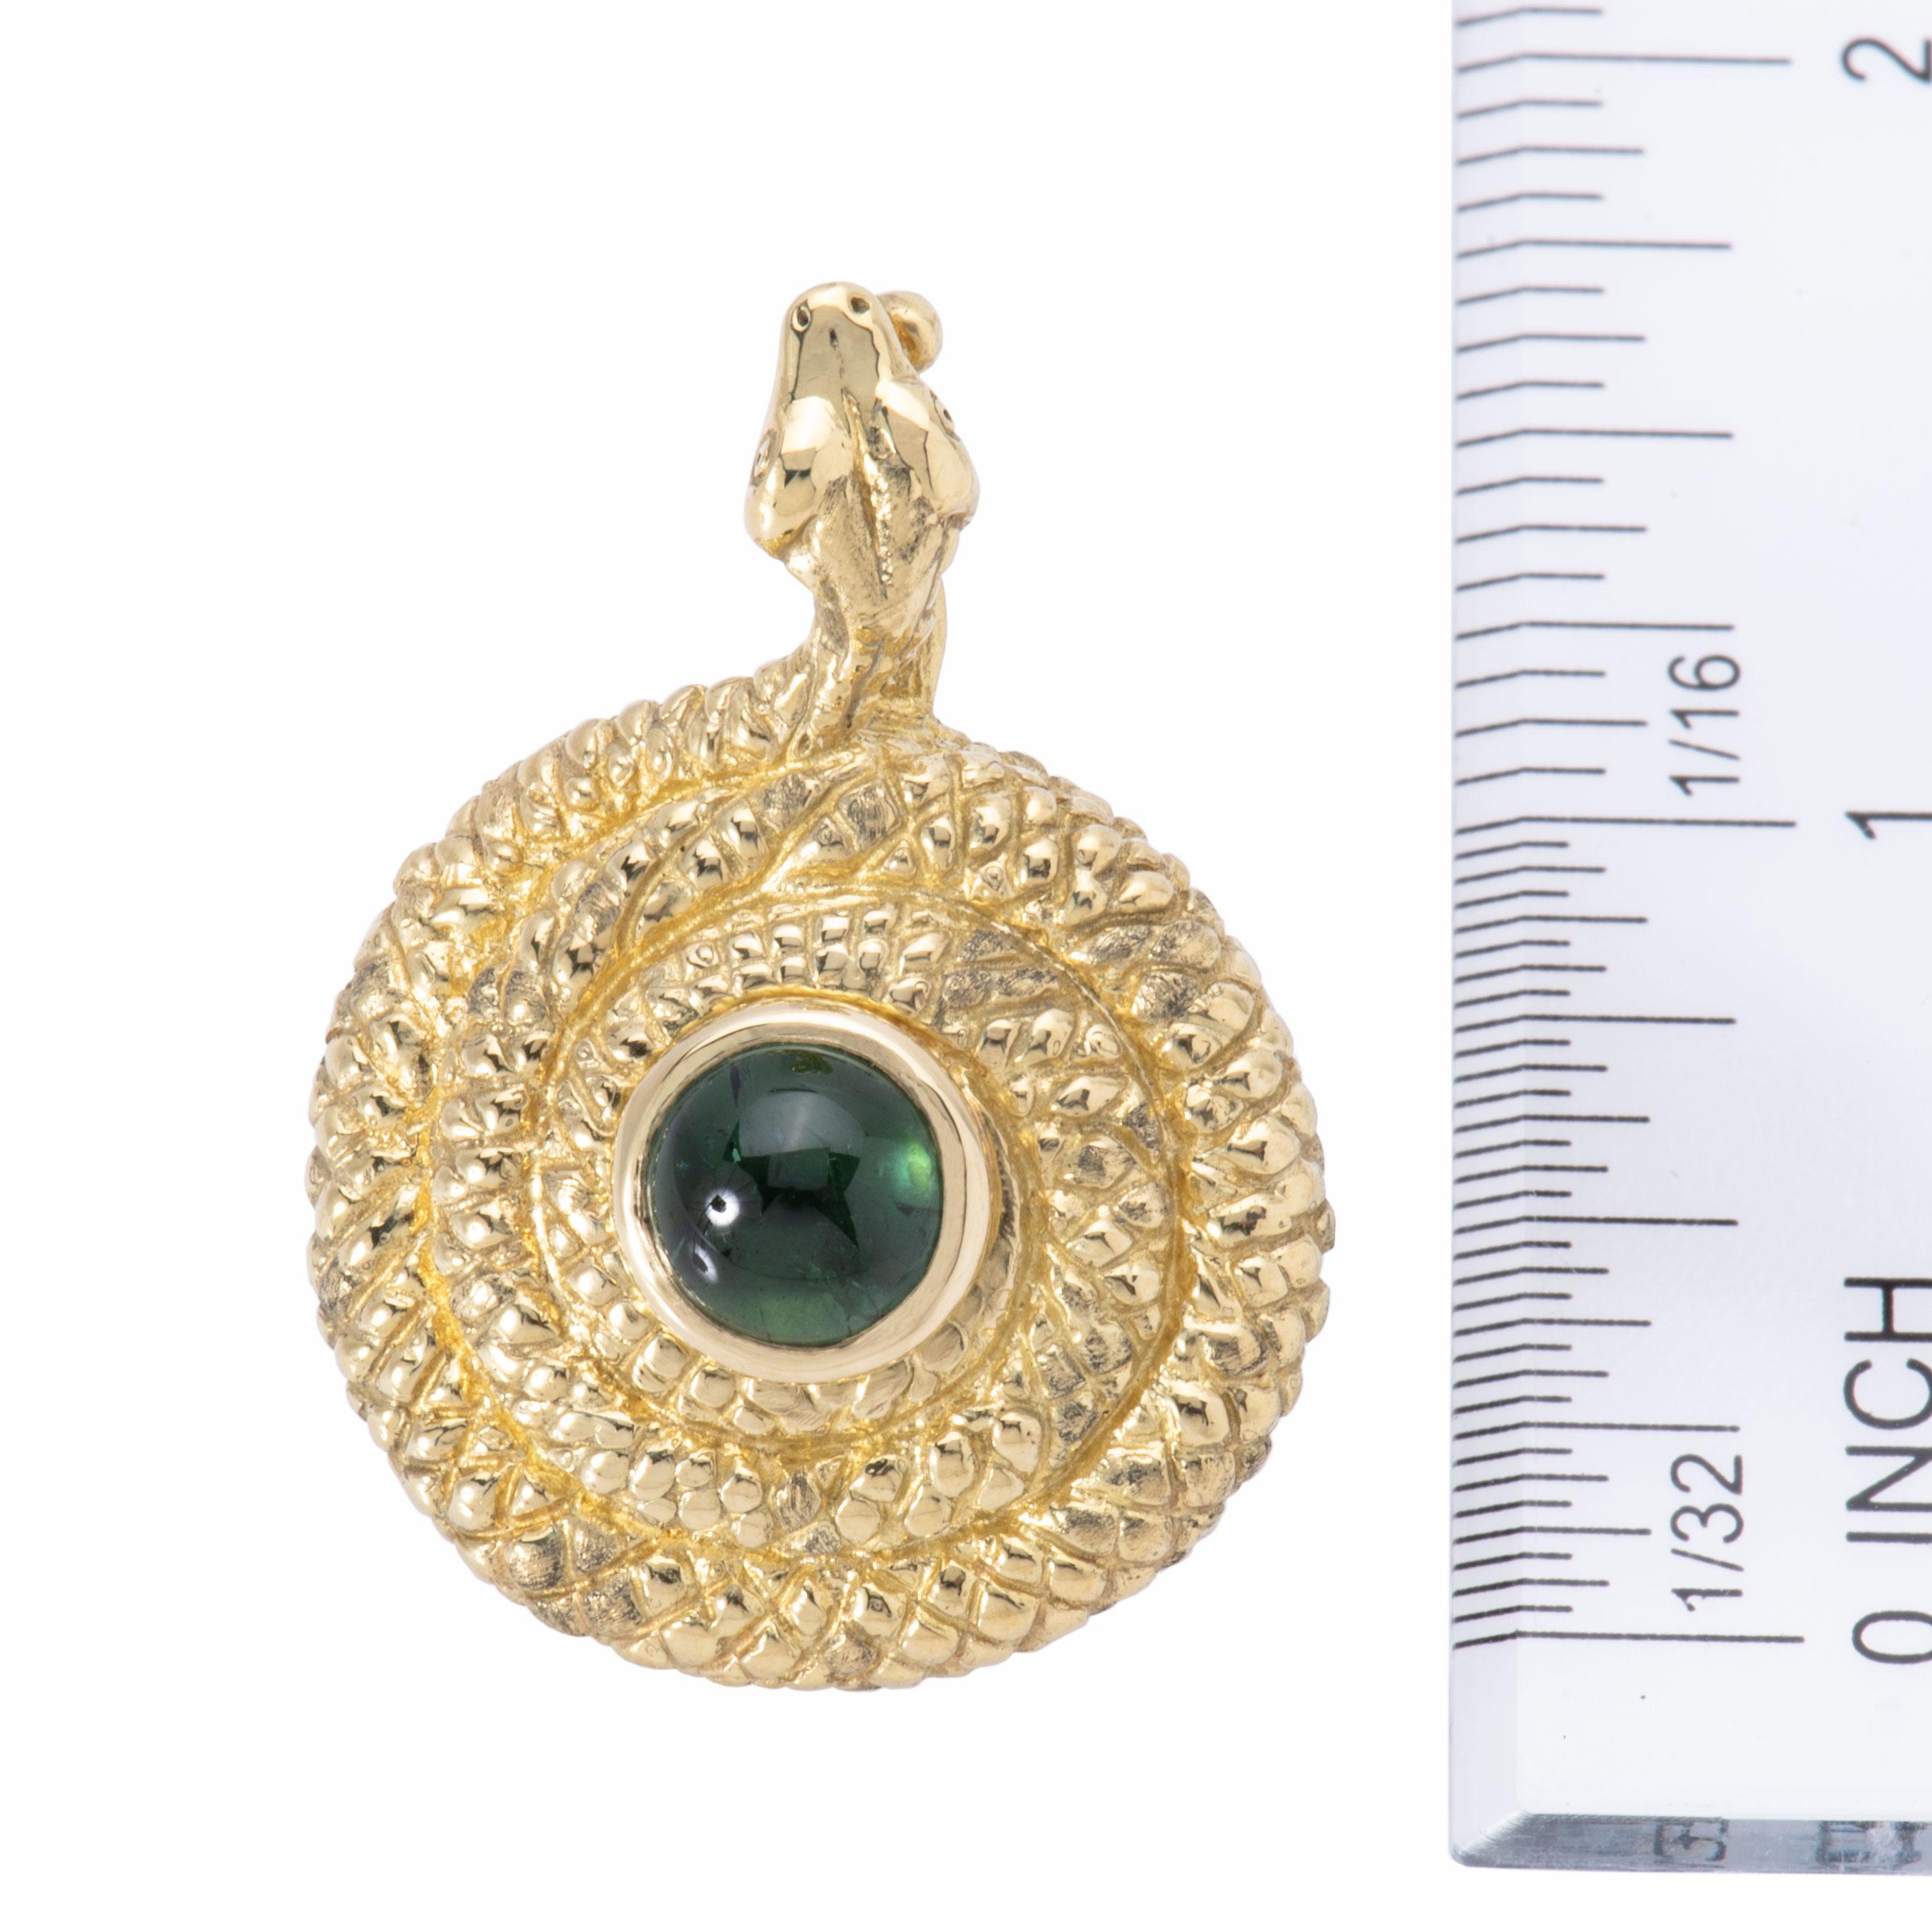 Conjure ancient mysteries of desert sands with this snake locket pendant embellished with 2.22cts of glowing, green tourmaline cabochon. Handcrafted entirely of 18k gold, the bail is comprised of the snakes's head and the body winds around to form a